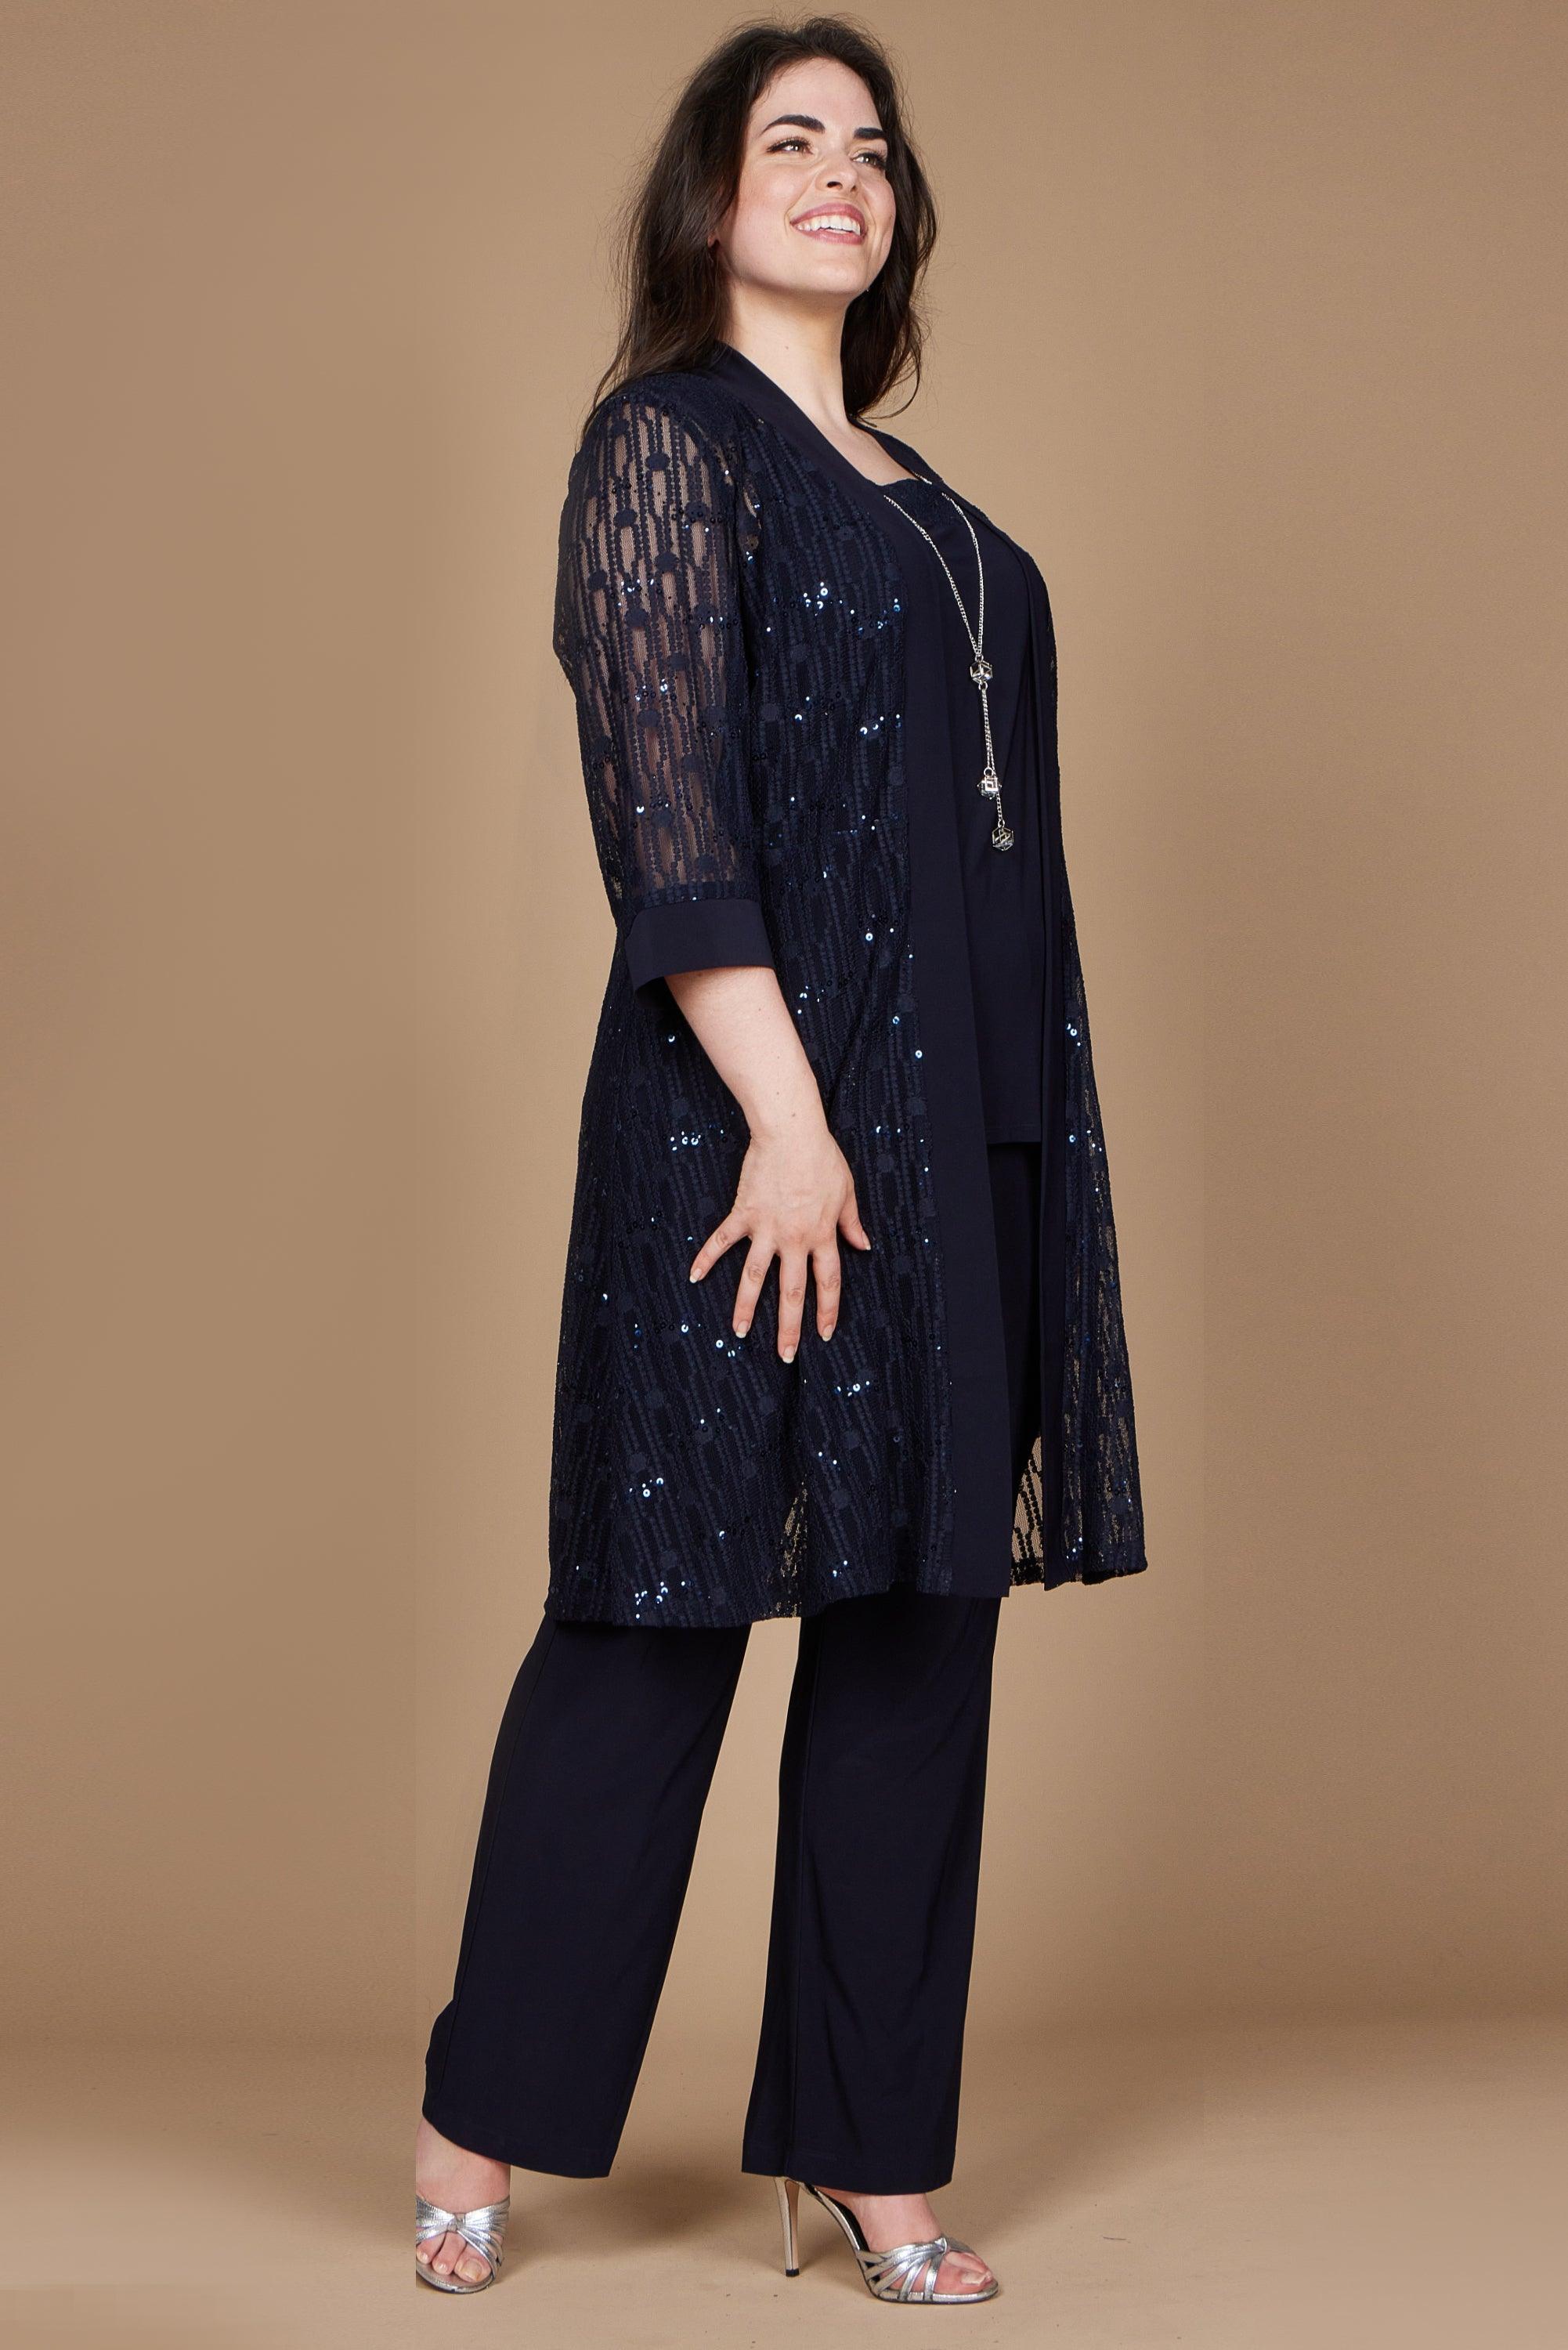 Navy R&M Richards 7914W Plus Size Formal Pant Suit for $49.99, – The Dress  Outlet